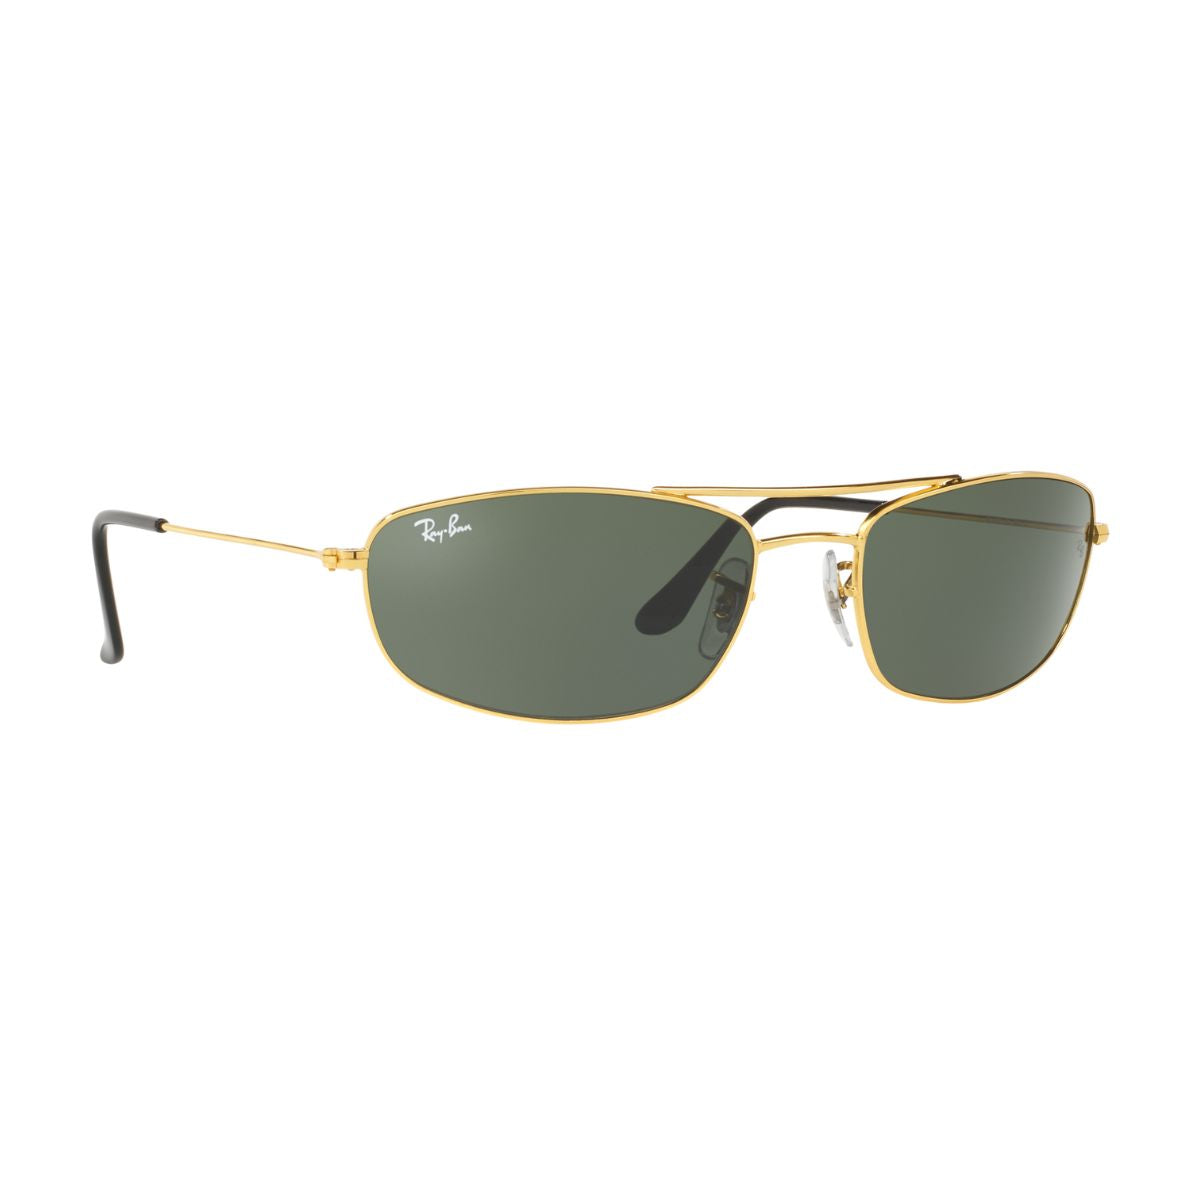 "Rayban  3383 001 UV Protection Rectangle Sunglasses For Men's At Optorium"